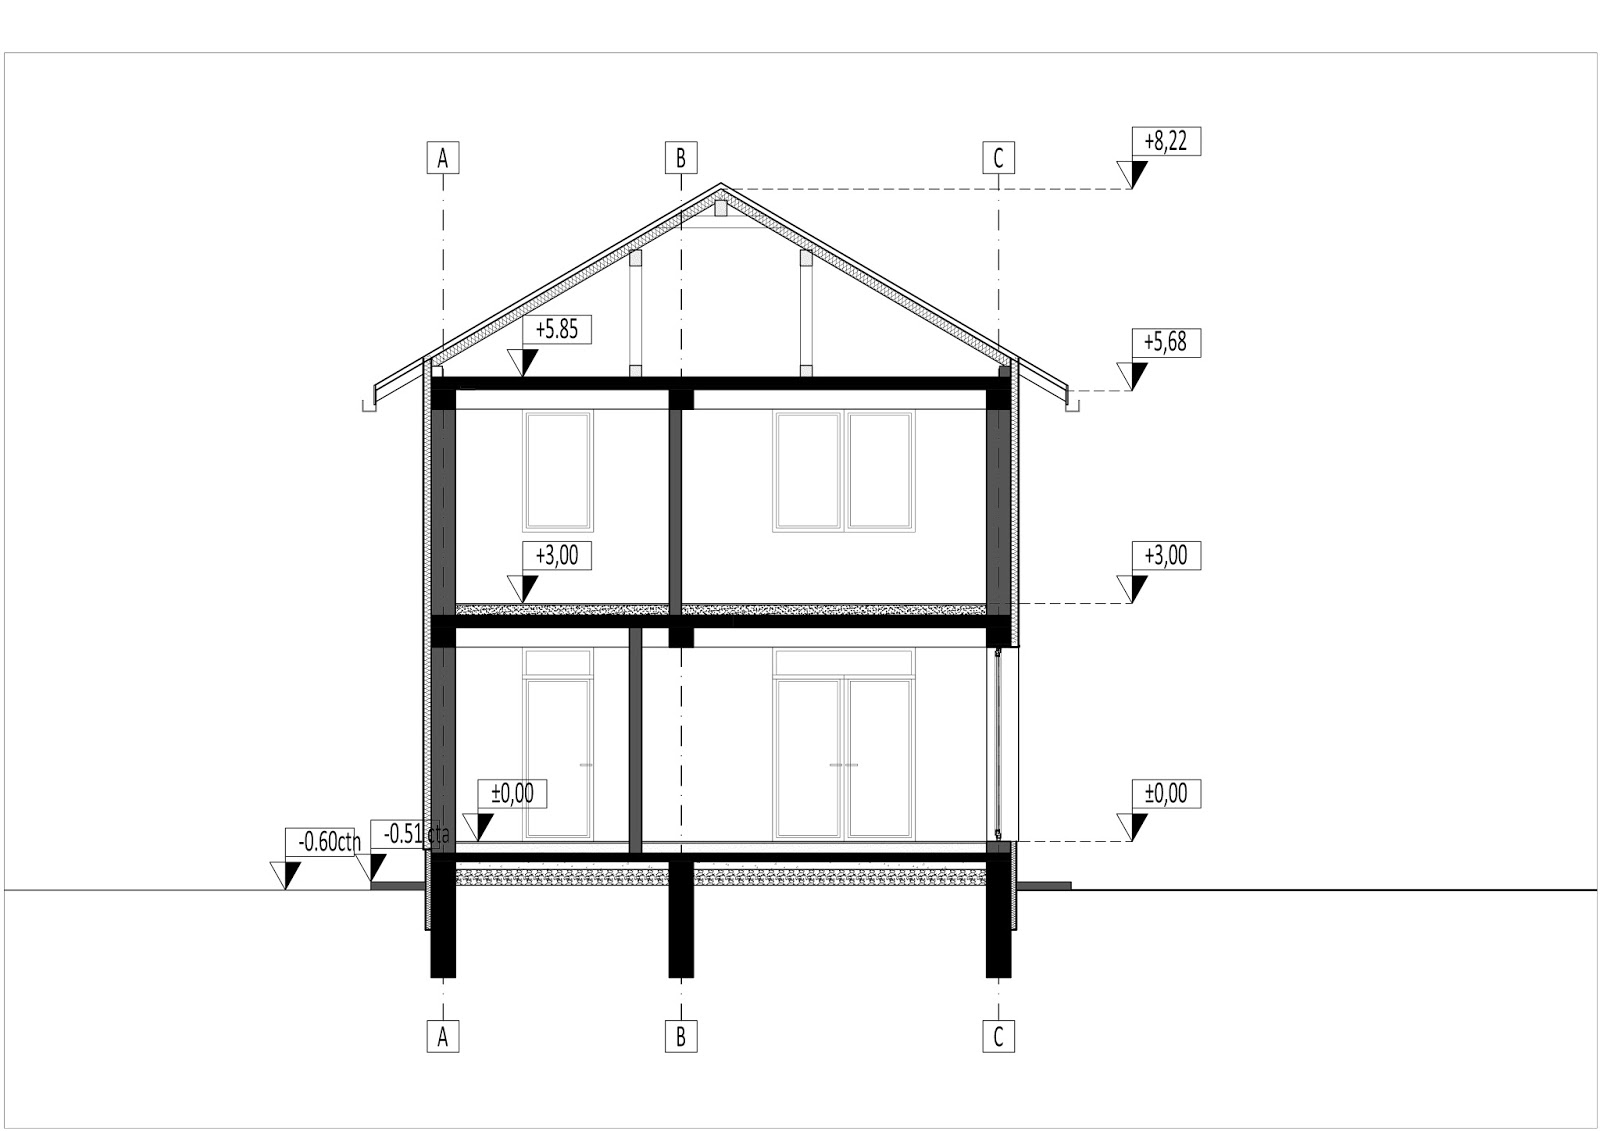 Two-story house plans are more inexpensive than one-story homes. It is more systematic to construct and live in a two-story layout. Whatever your reason for choosing a two-story home, we know there's a design that has everything you want. Here are some free floor plans and layout for you.